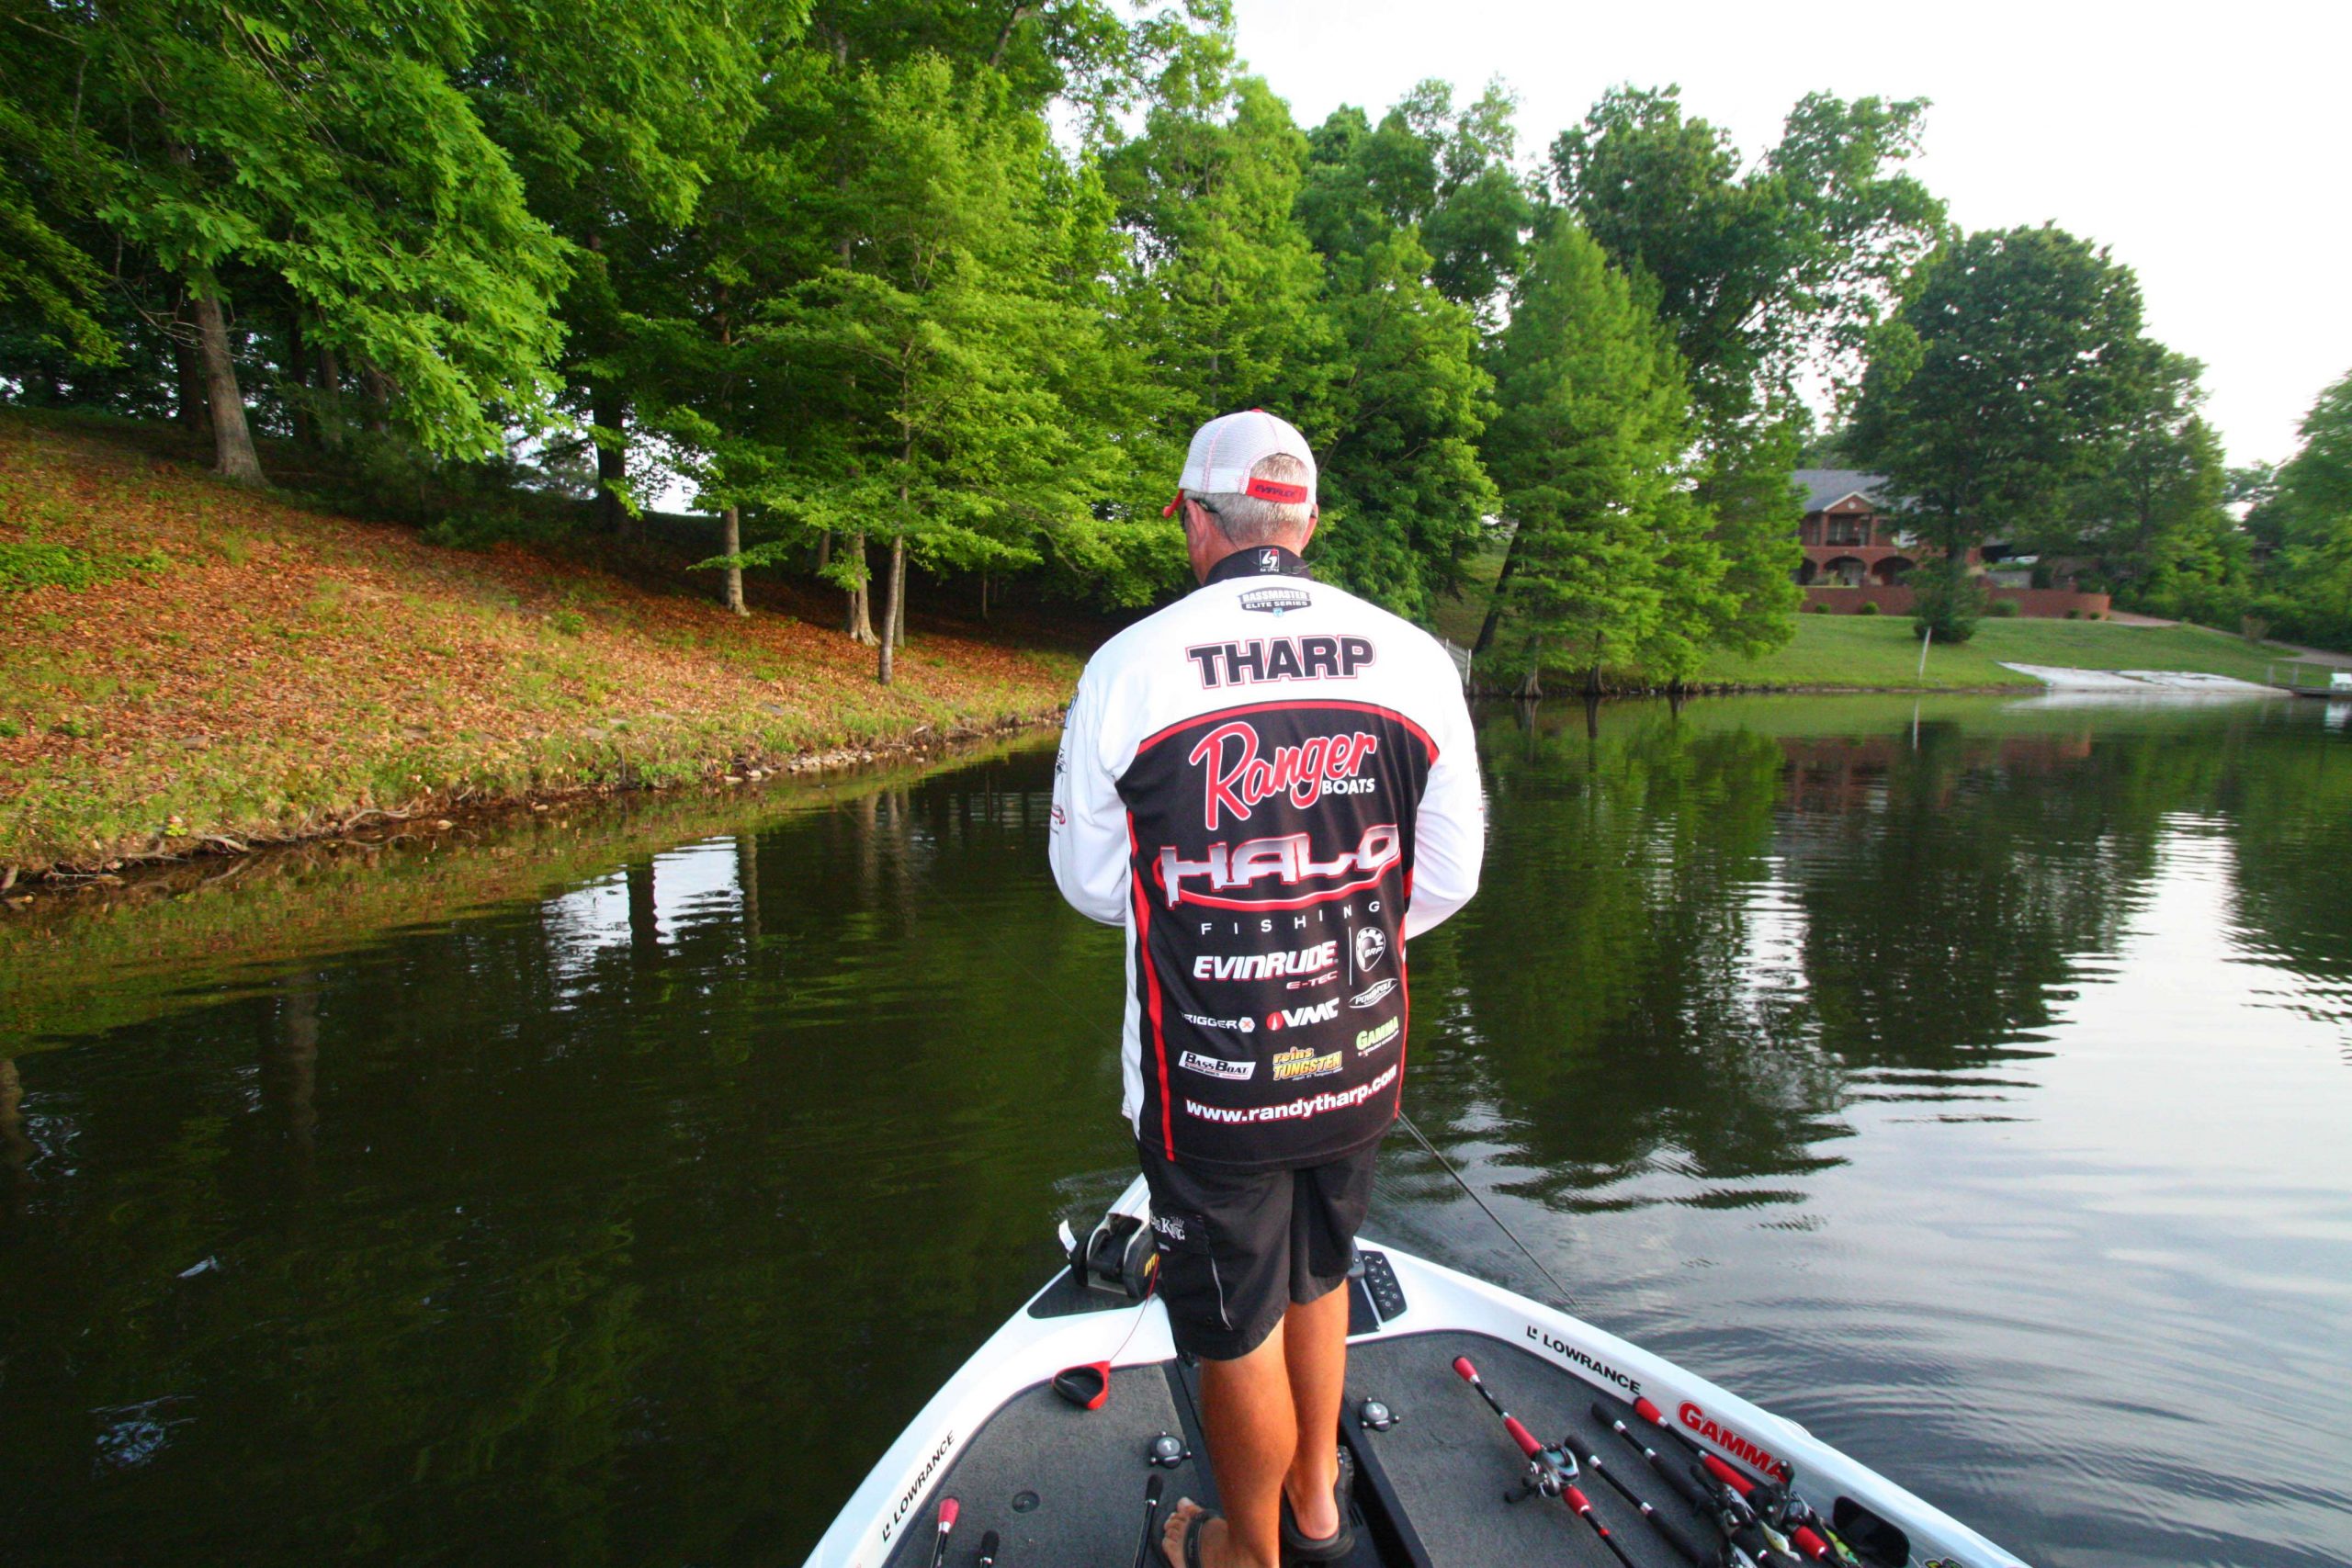 <b>6:43 a.m.</b> - Tharp starts off by throwing a buzzbait.
